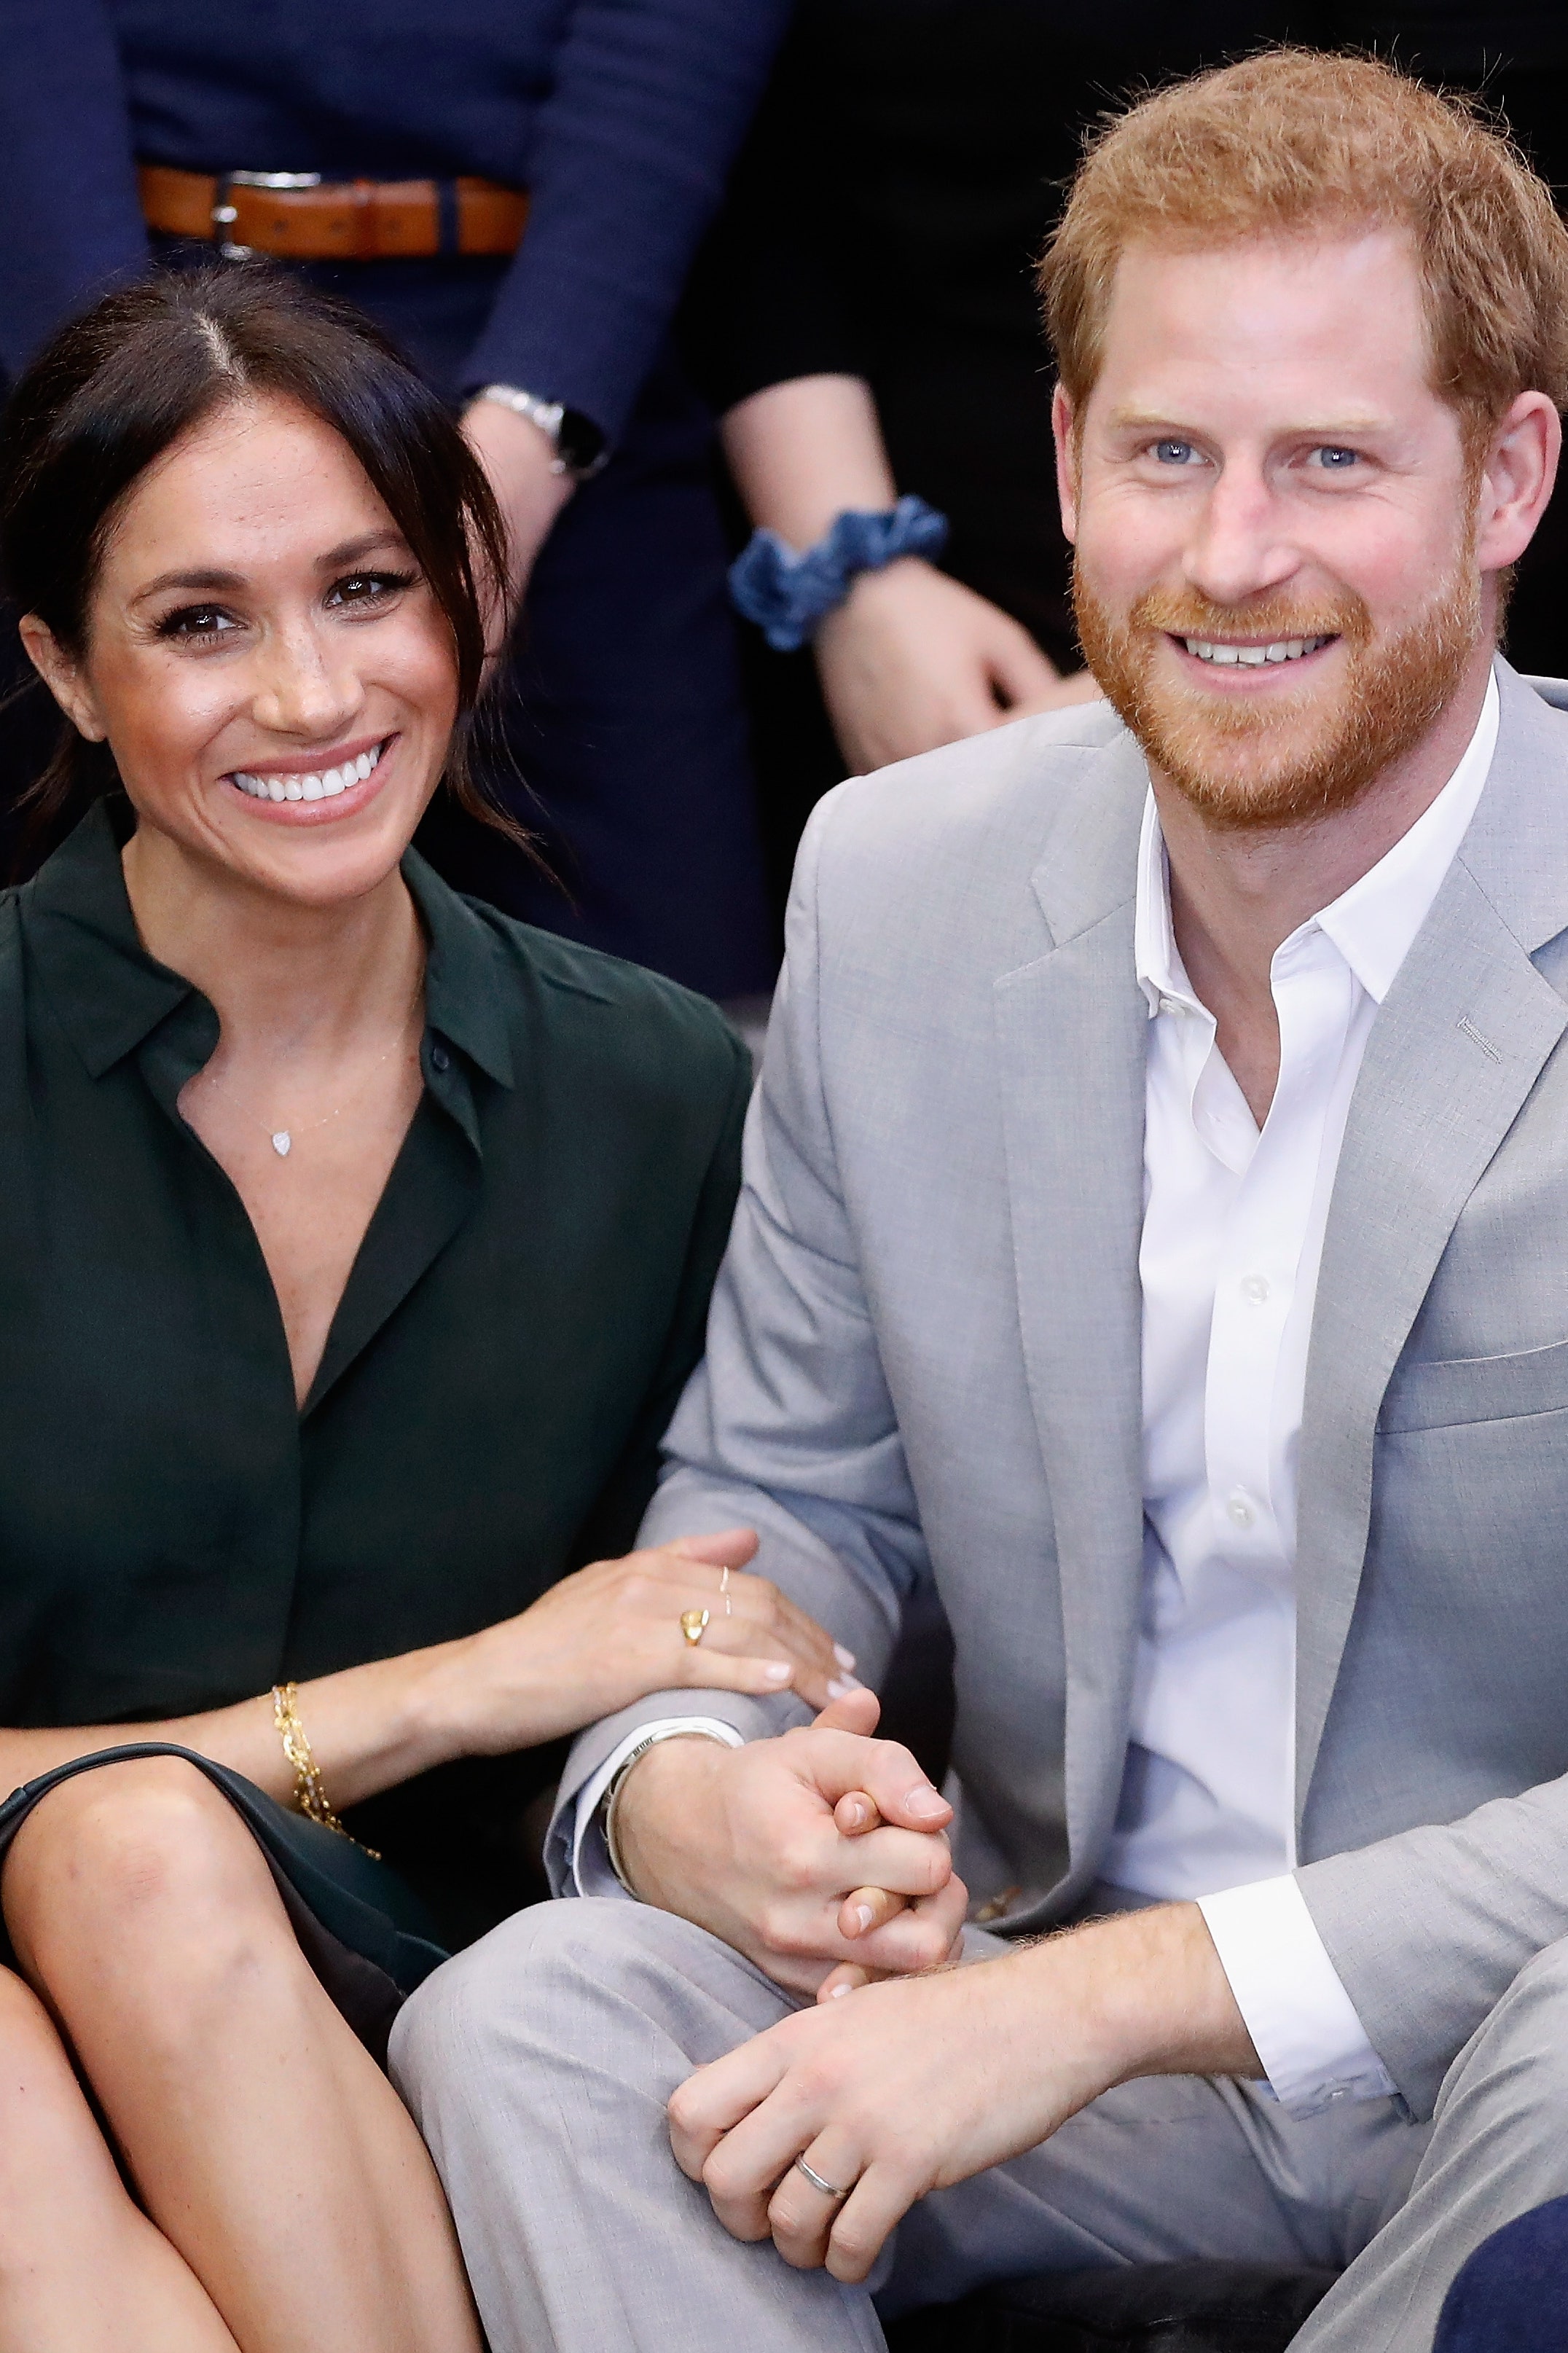 Royal family 2021 British royals 2021 Meghan Markle Prince Harry vogue Prince Andrew evidence Meghan court case Queen...